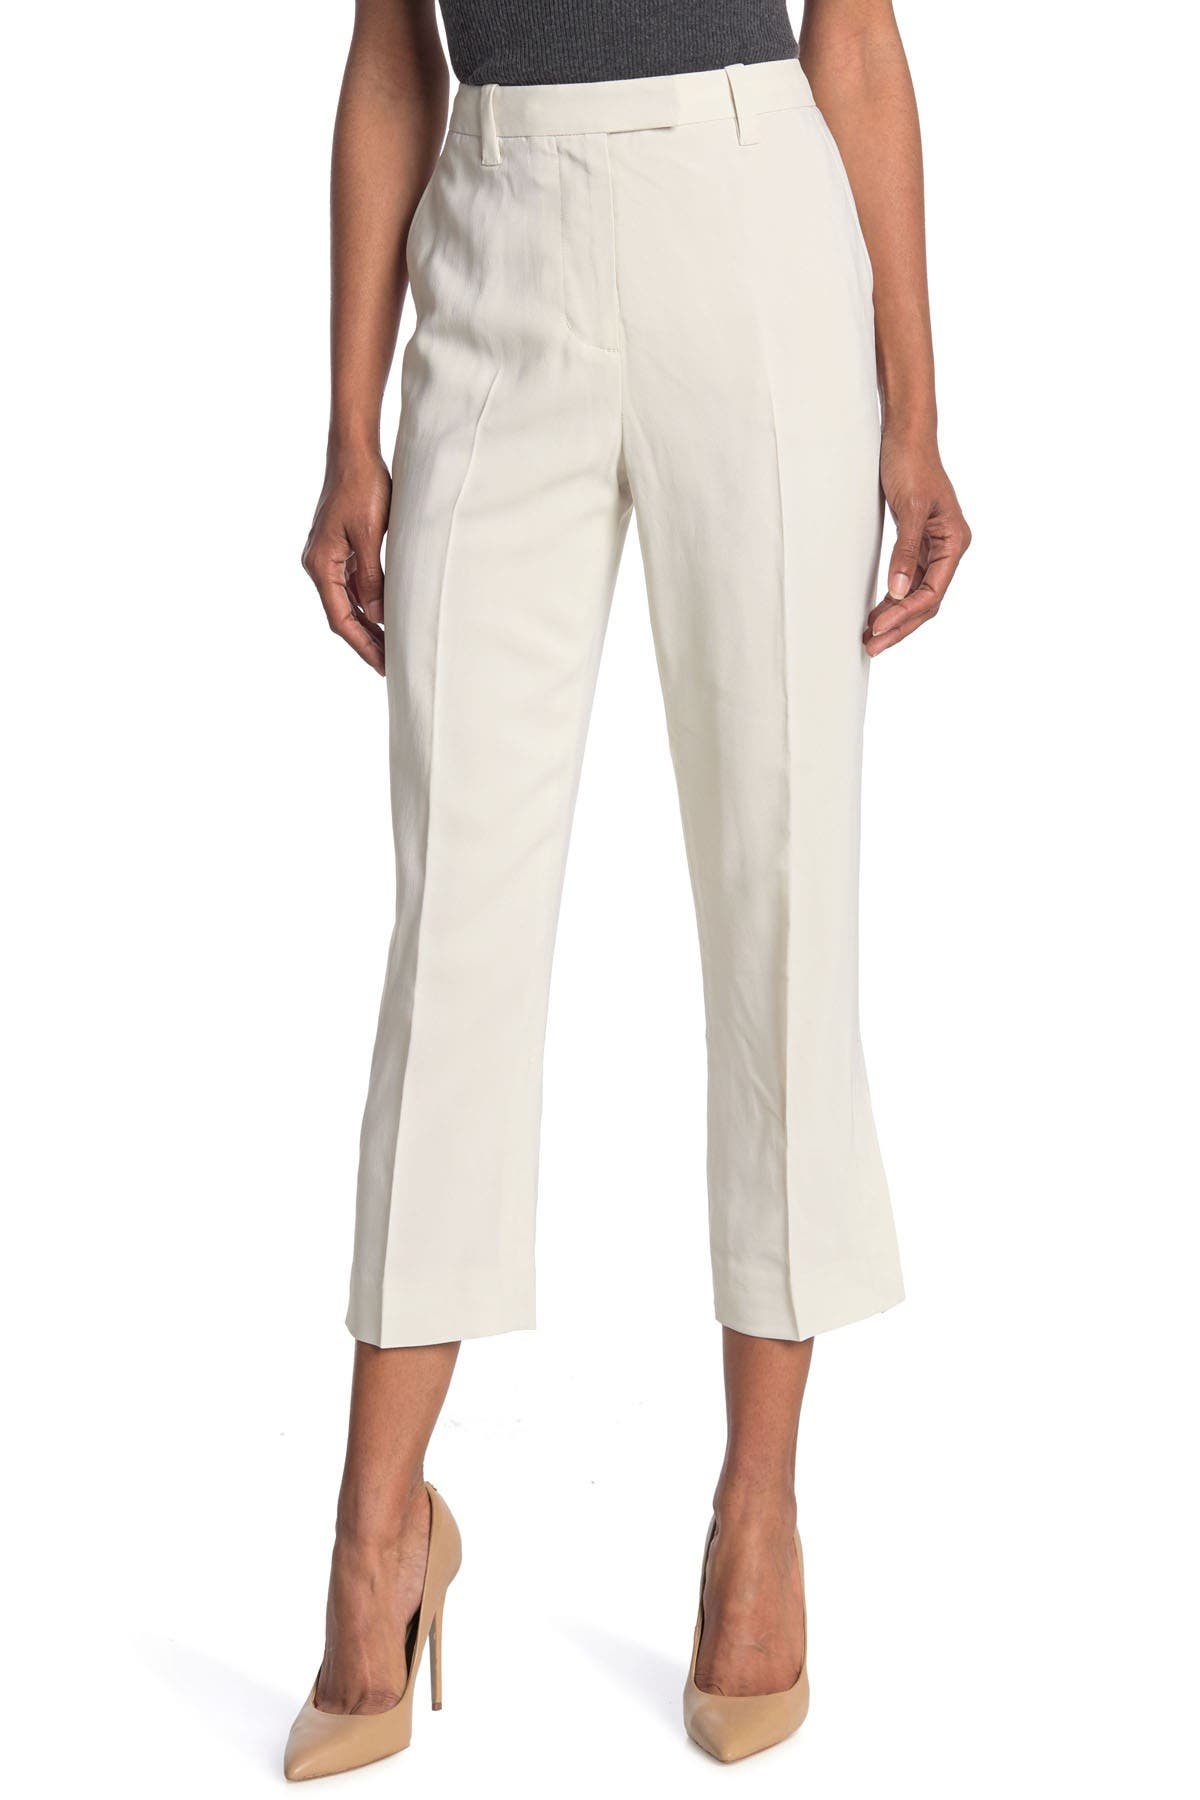 3.1 Phillip Lim / フィリップ リム Cropped Kick Flare Pants In Natural Wht